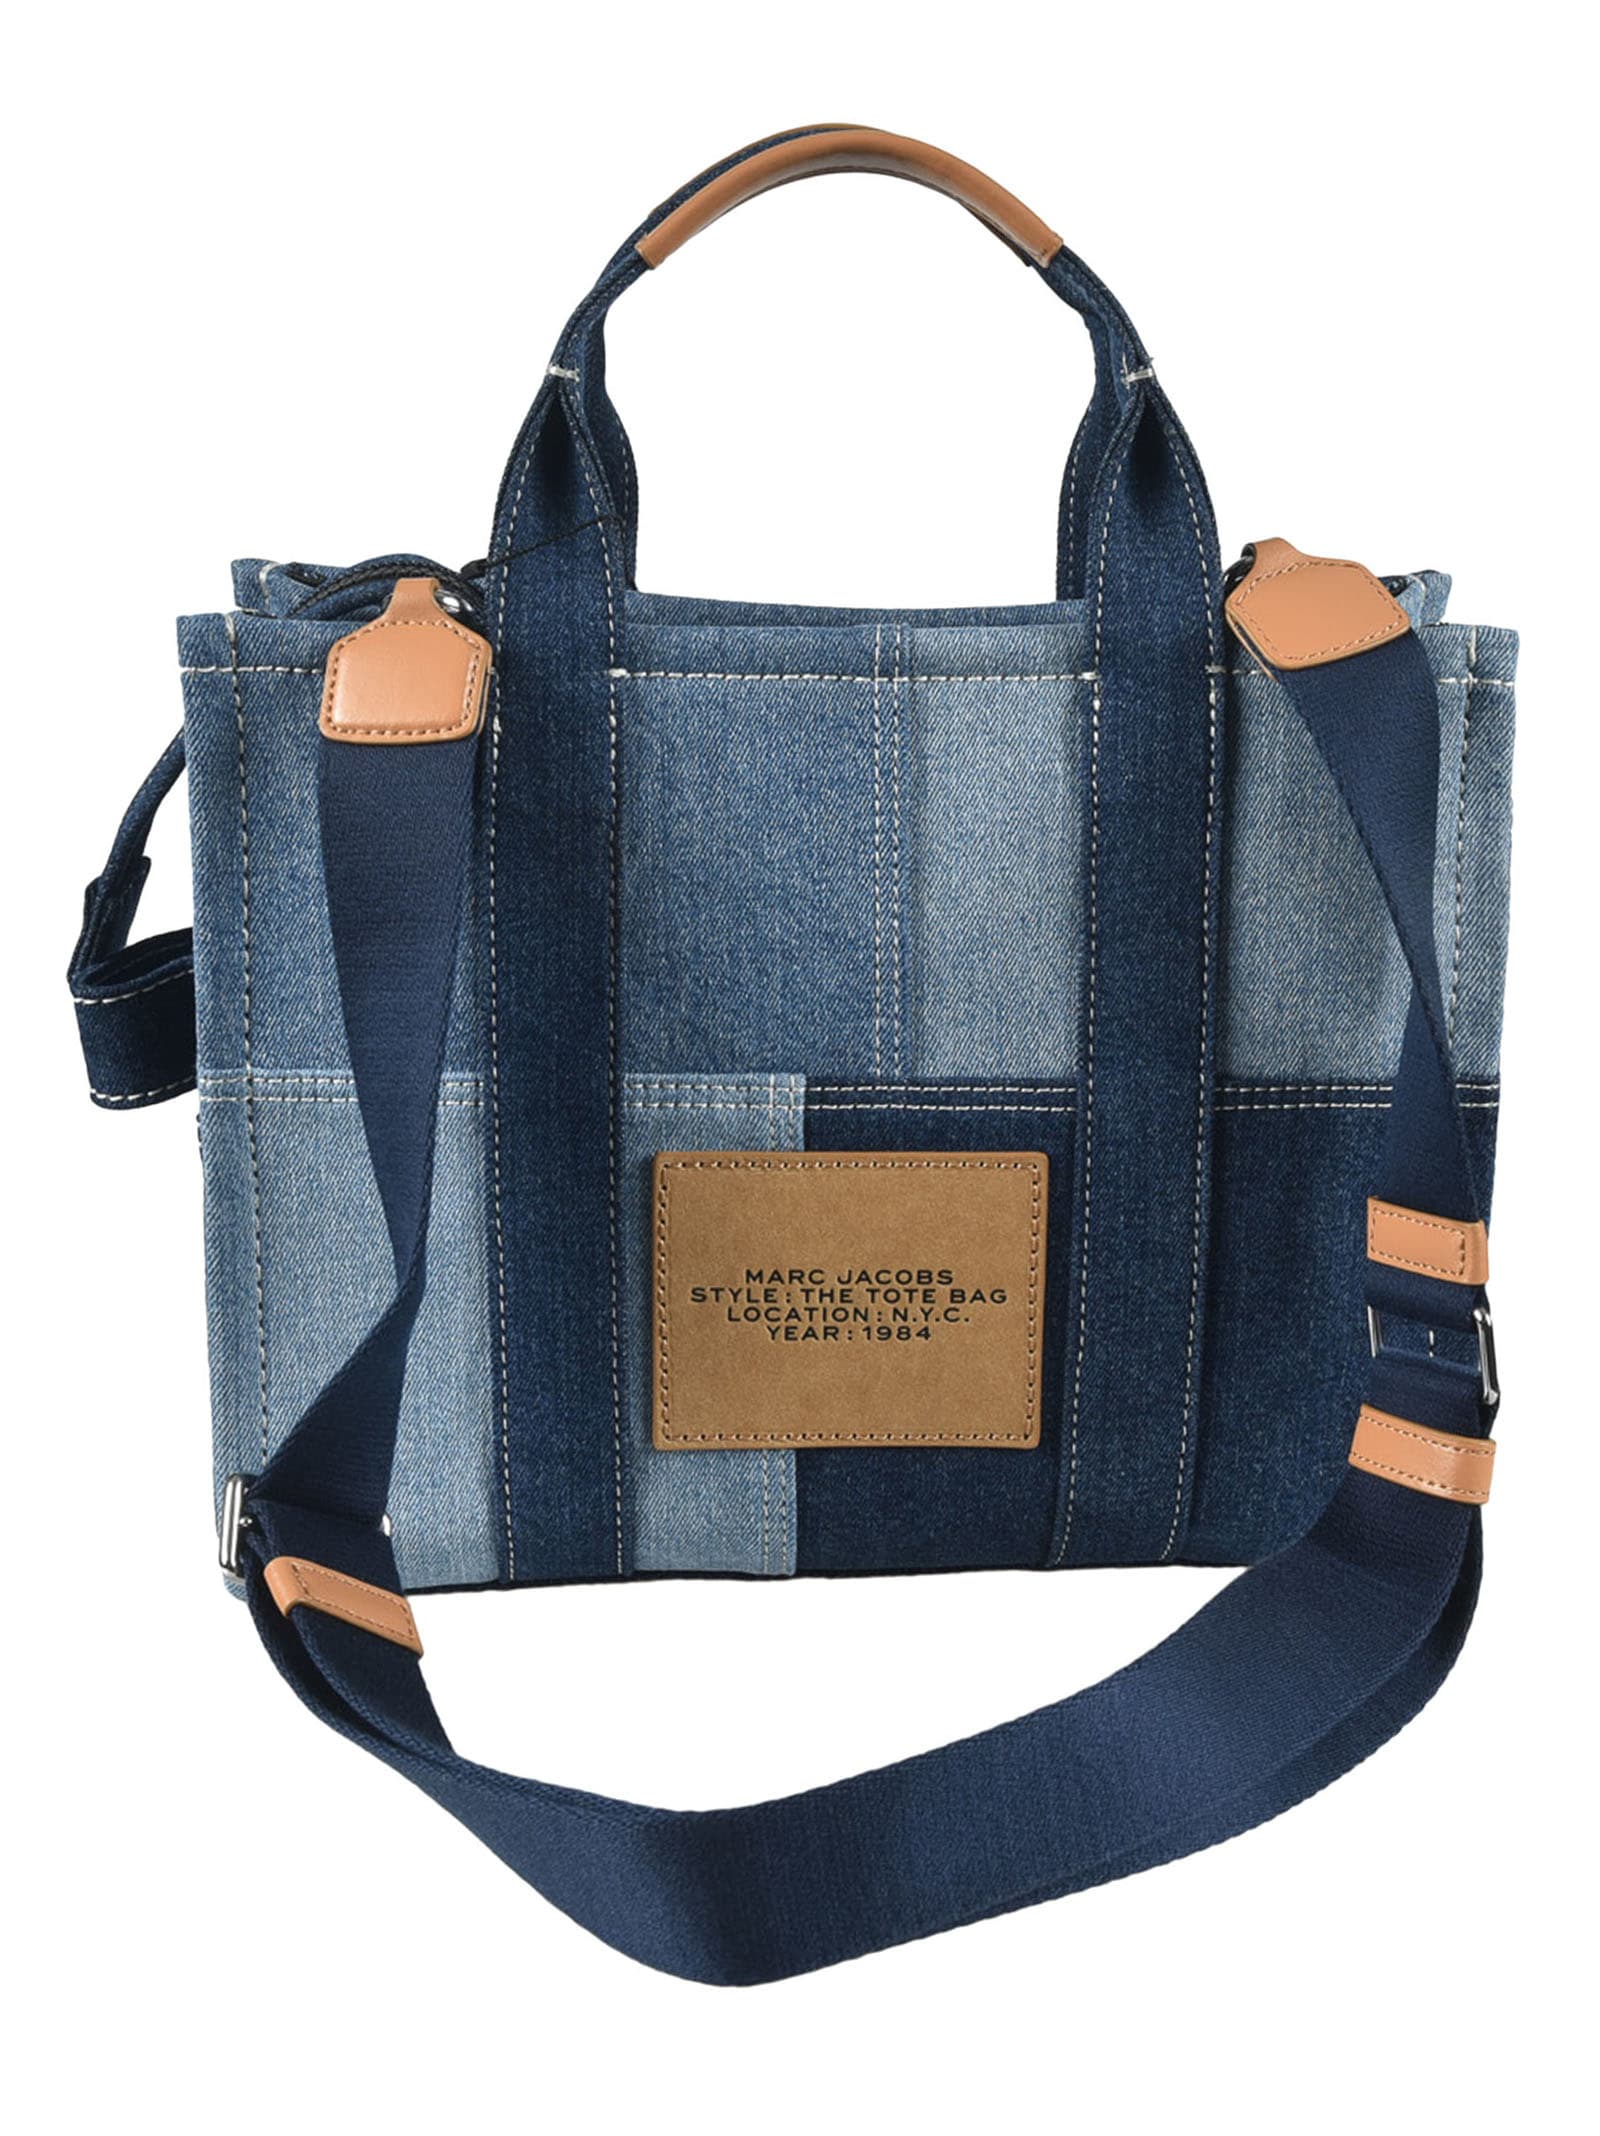 Shop Marc Jacobs The Tote Bag Denim Tote In Blue